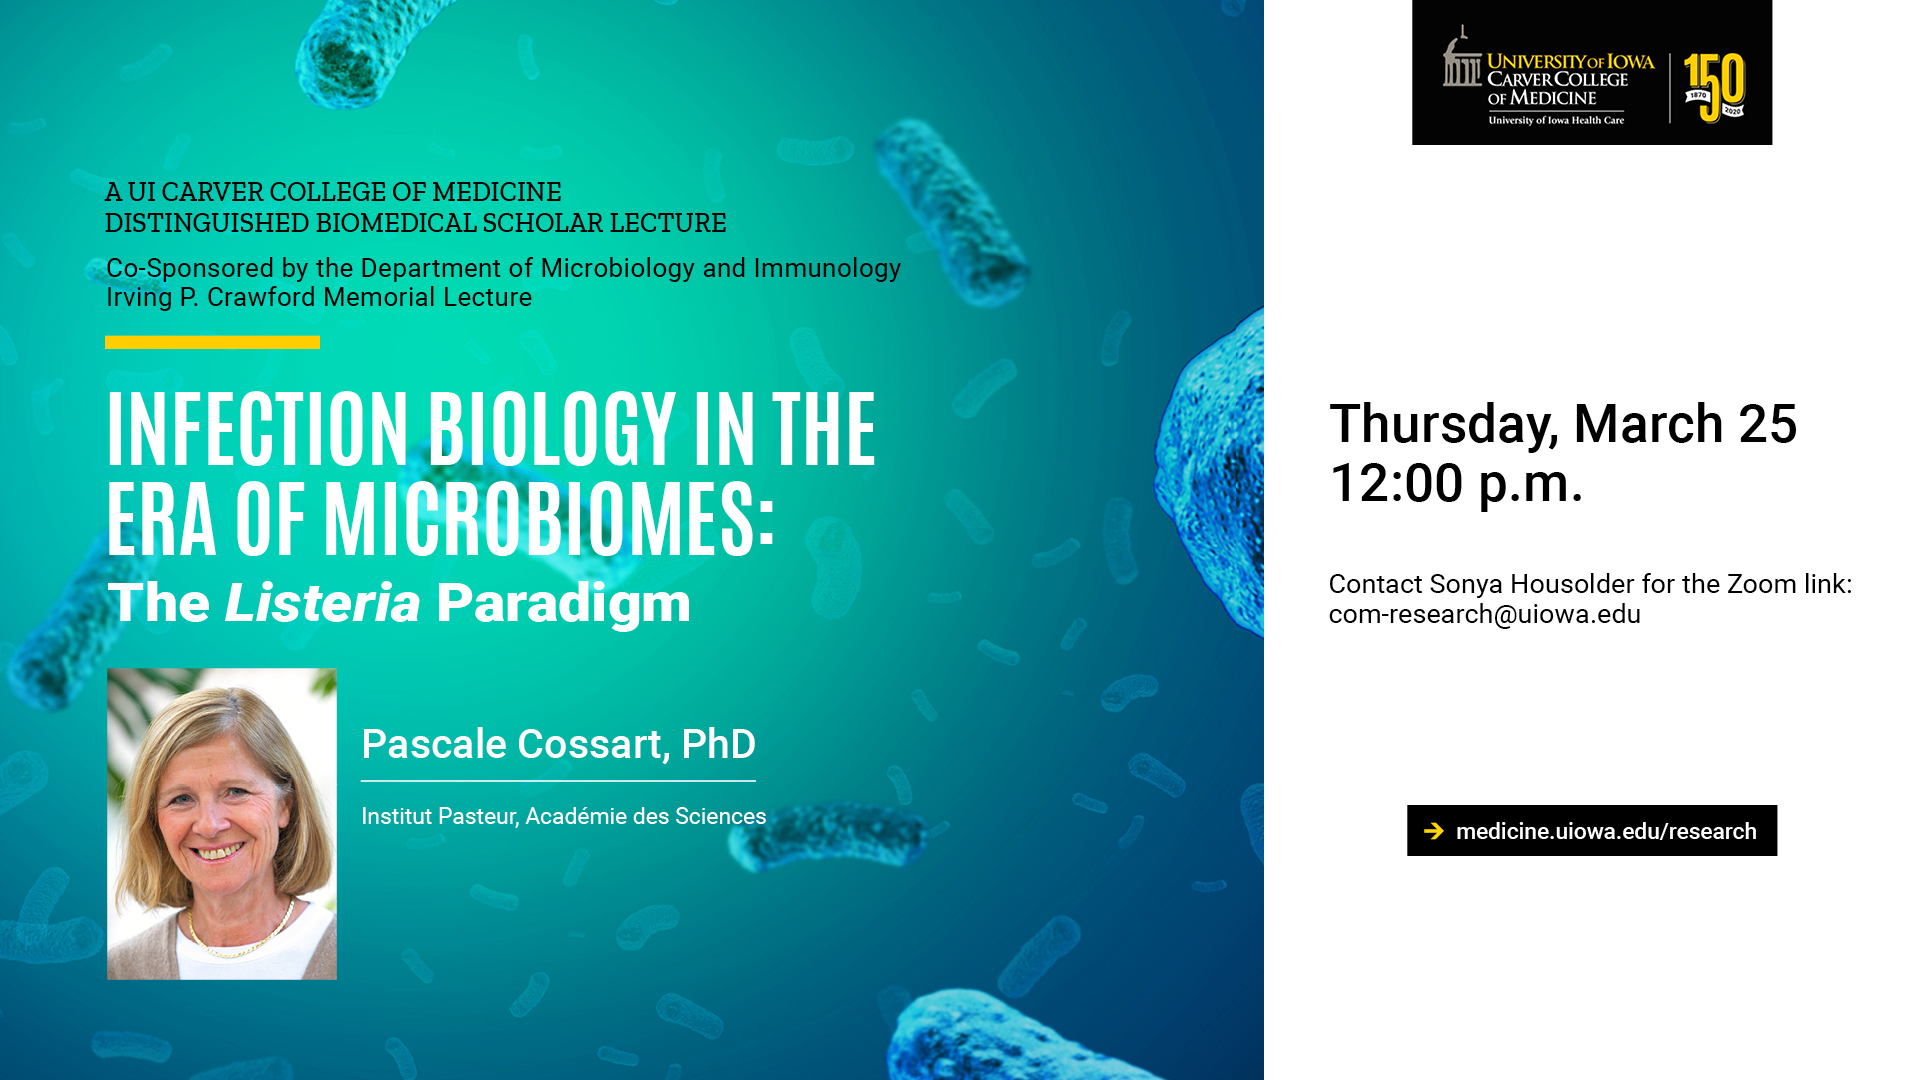 Distinguished Biomedical Series (March 25 2021) Dr. Pascale Cossart